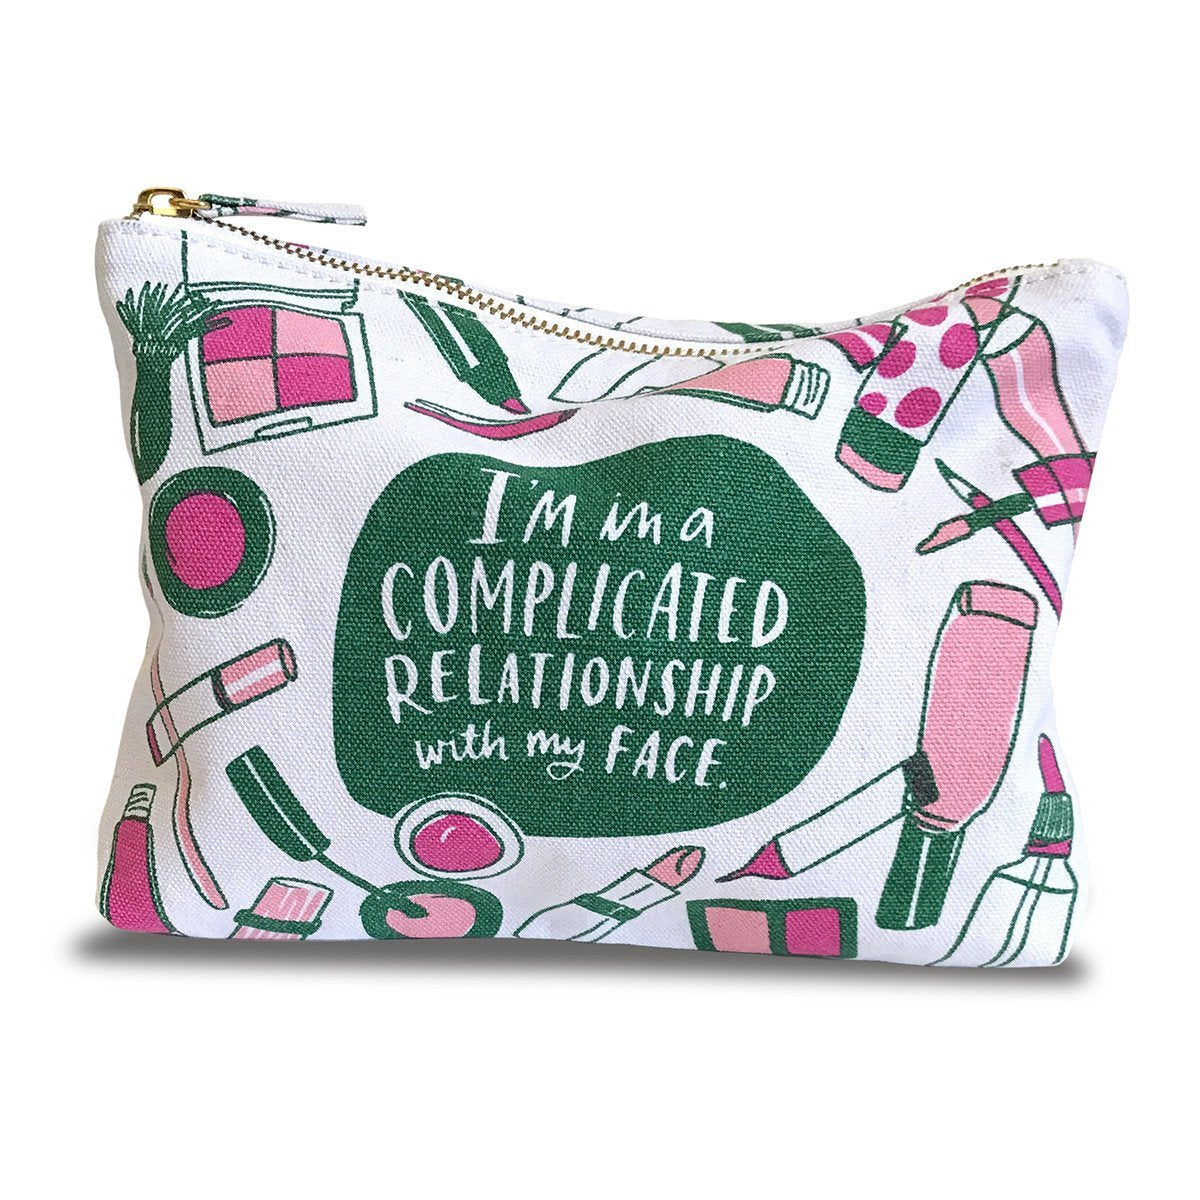 Complicated Relationship Canvas Pouch